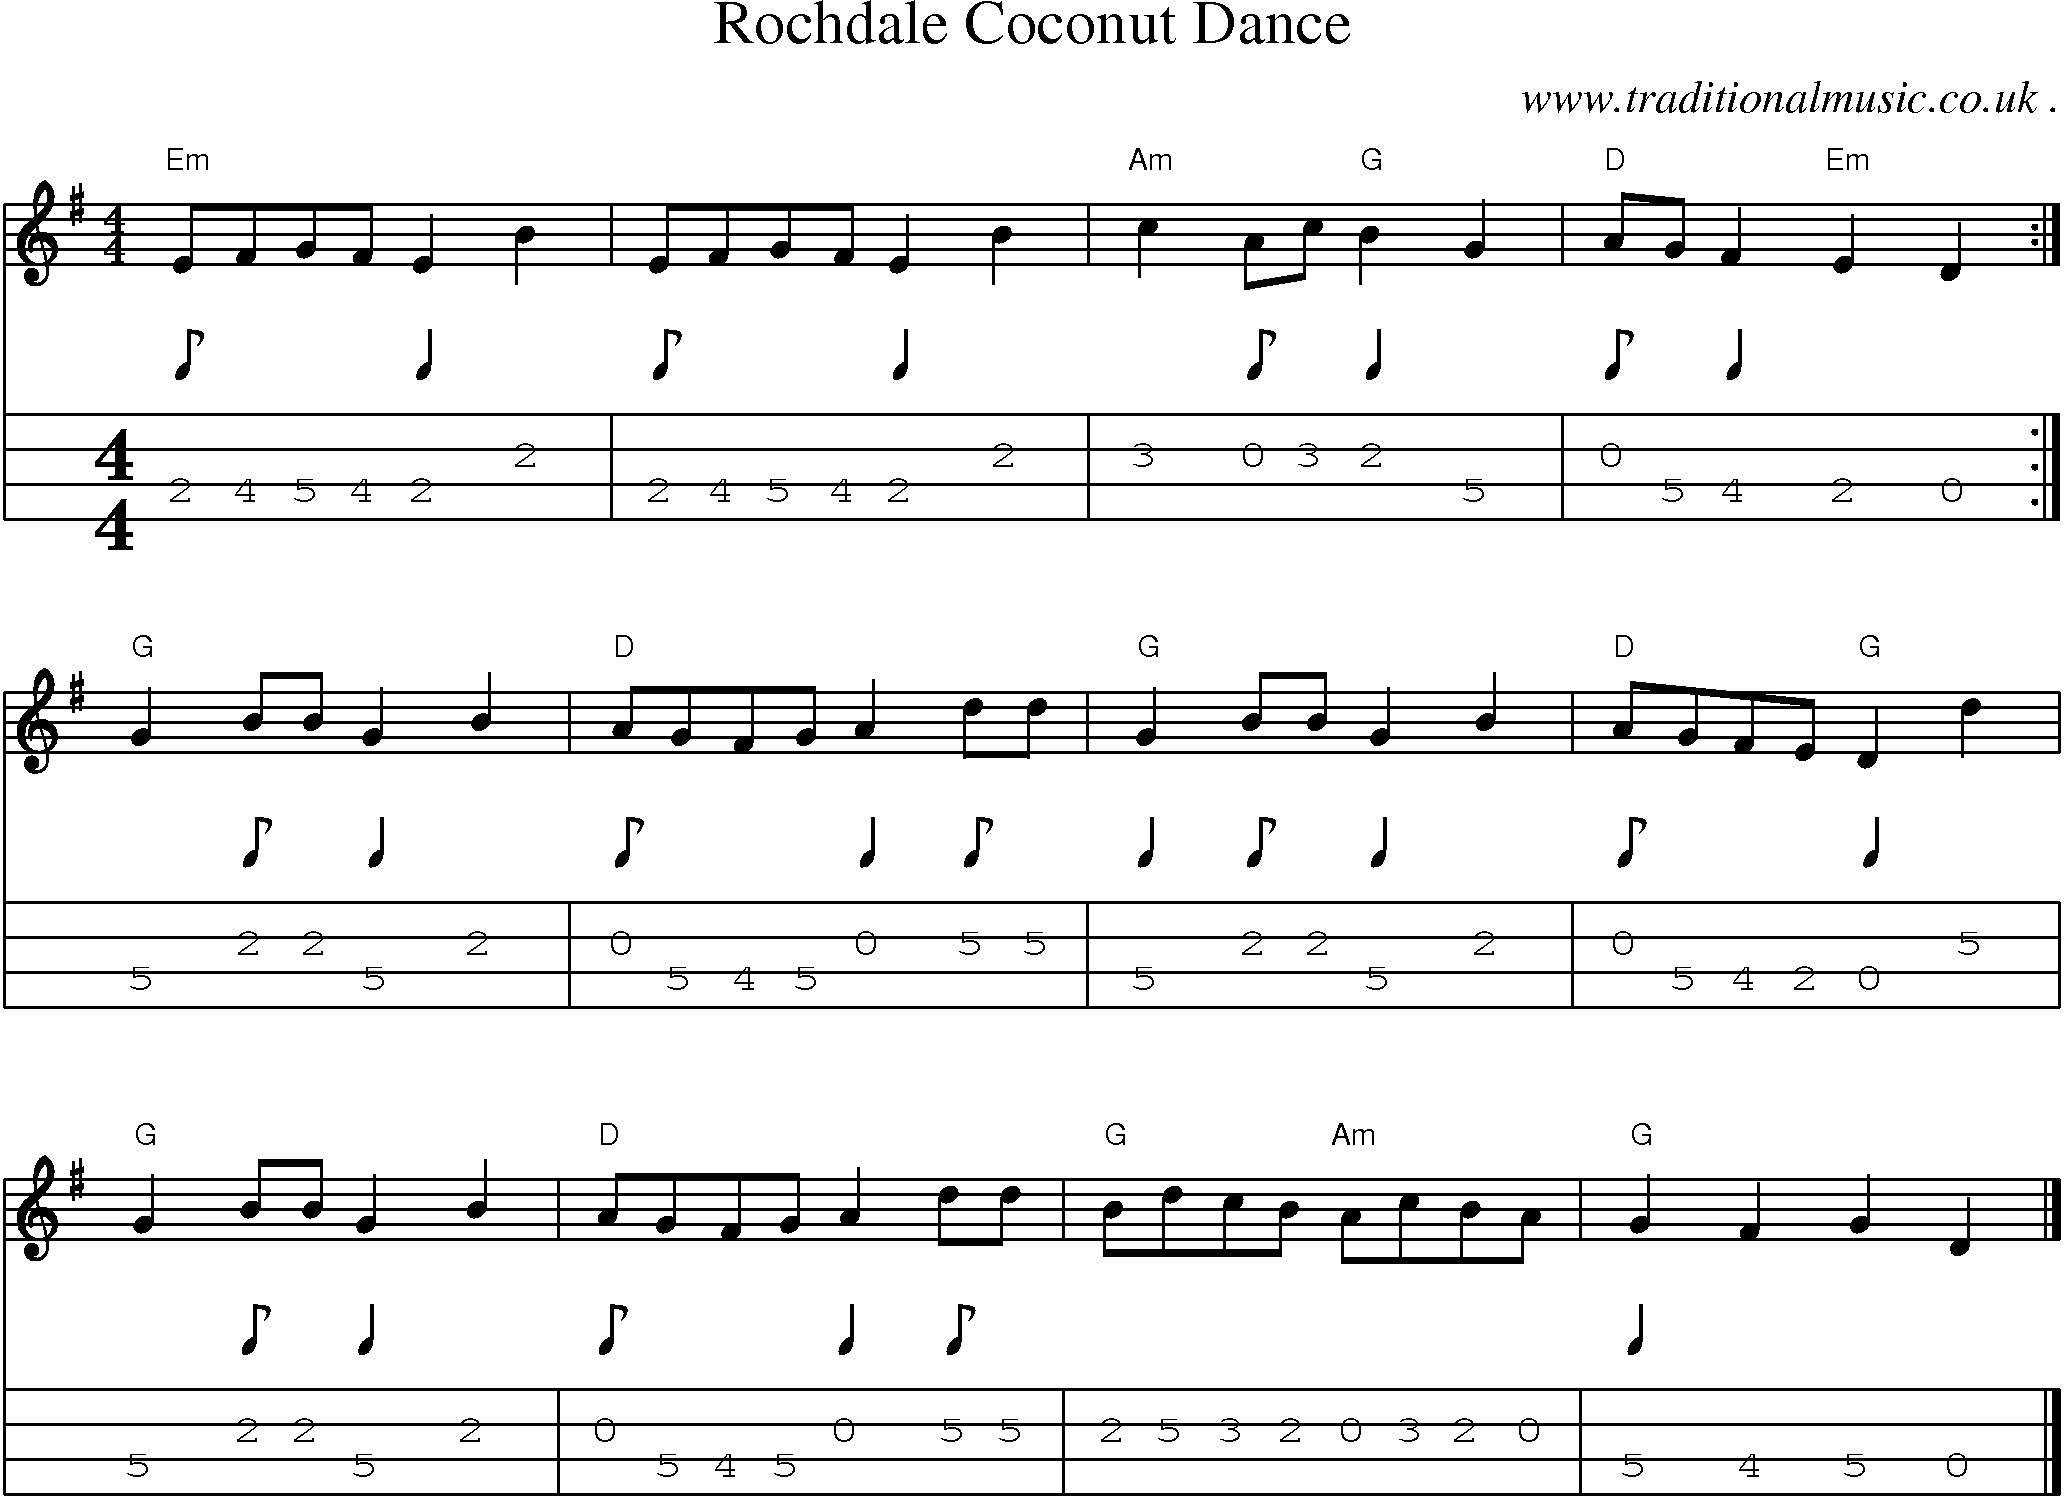 Music Score and Guitar Tabs for Rochdale Coconut Dance